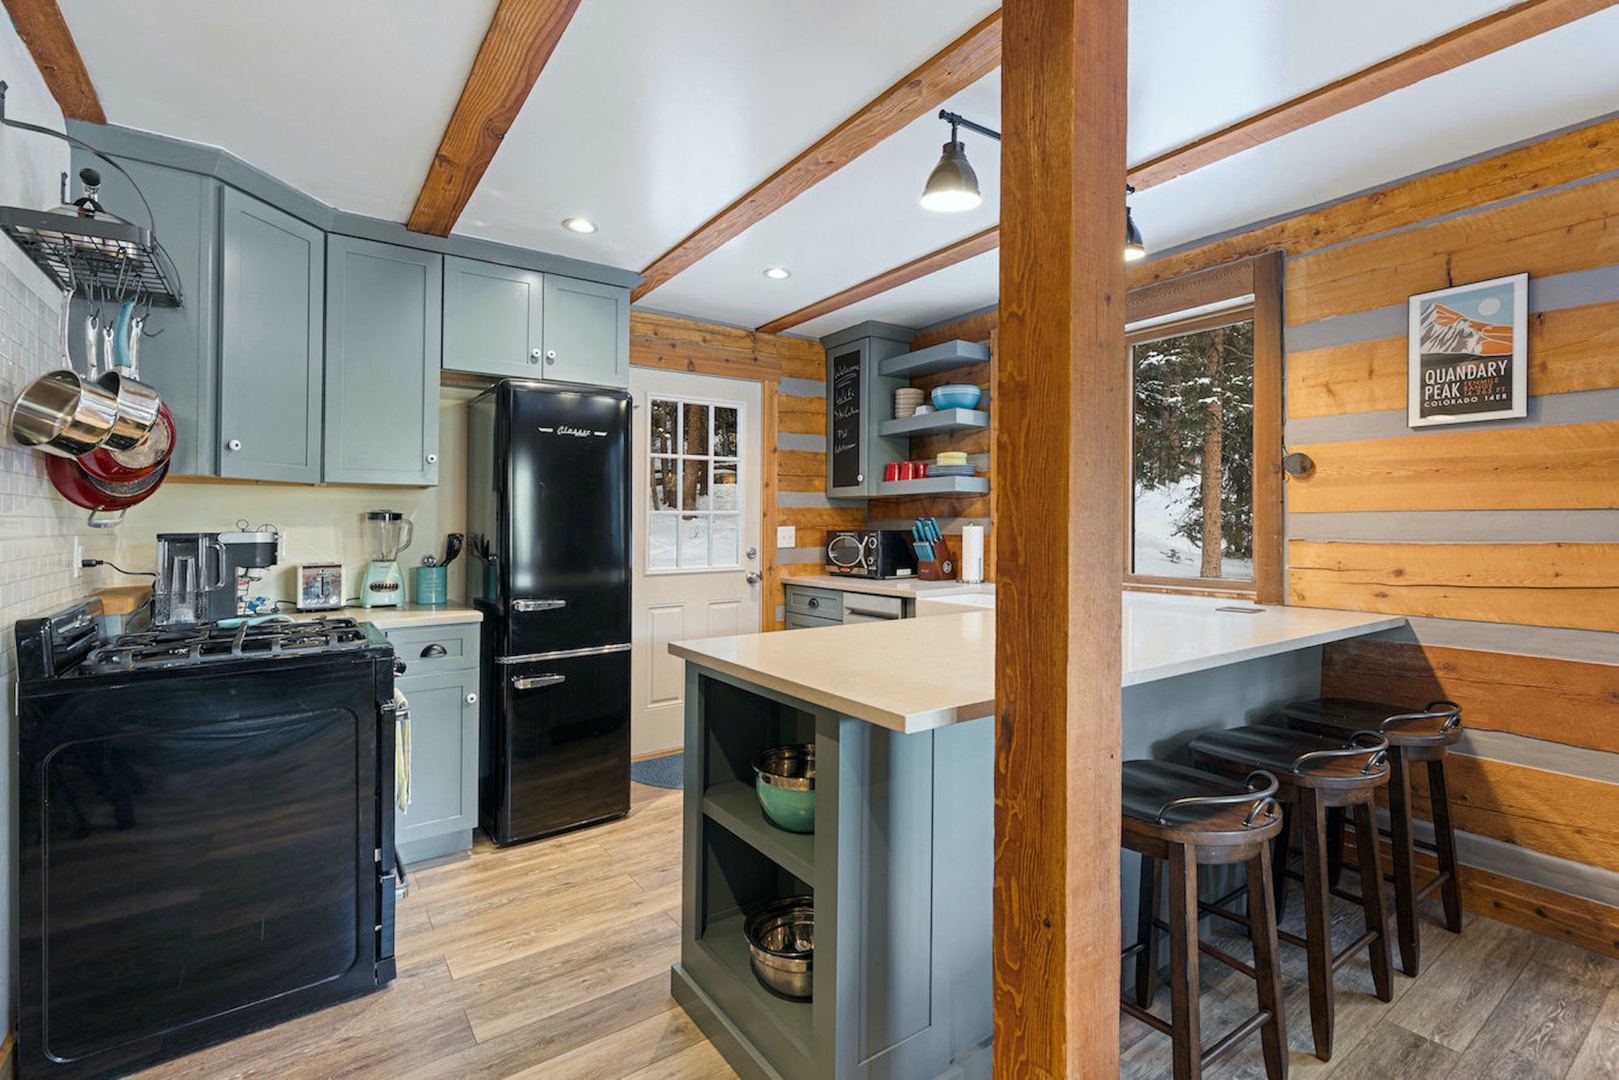 The open, inviting kitchen offers ample space & all the comforts of home